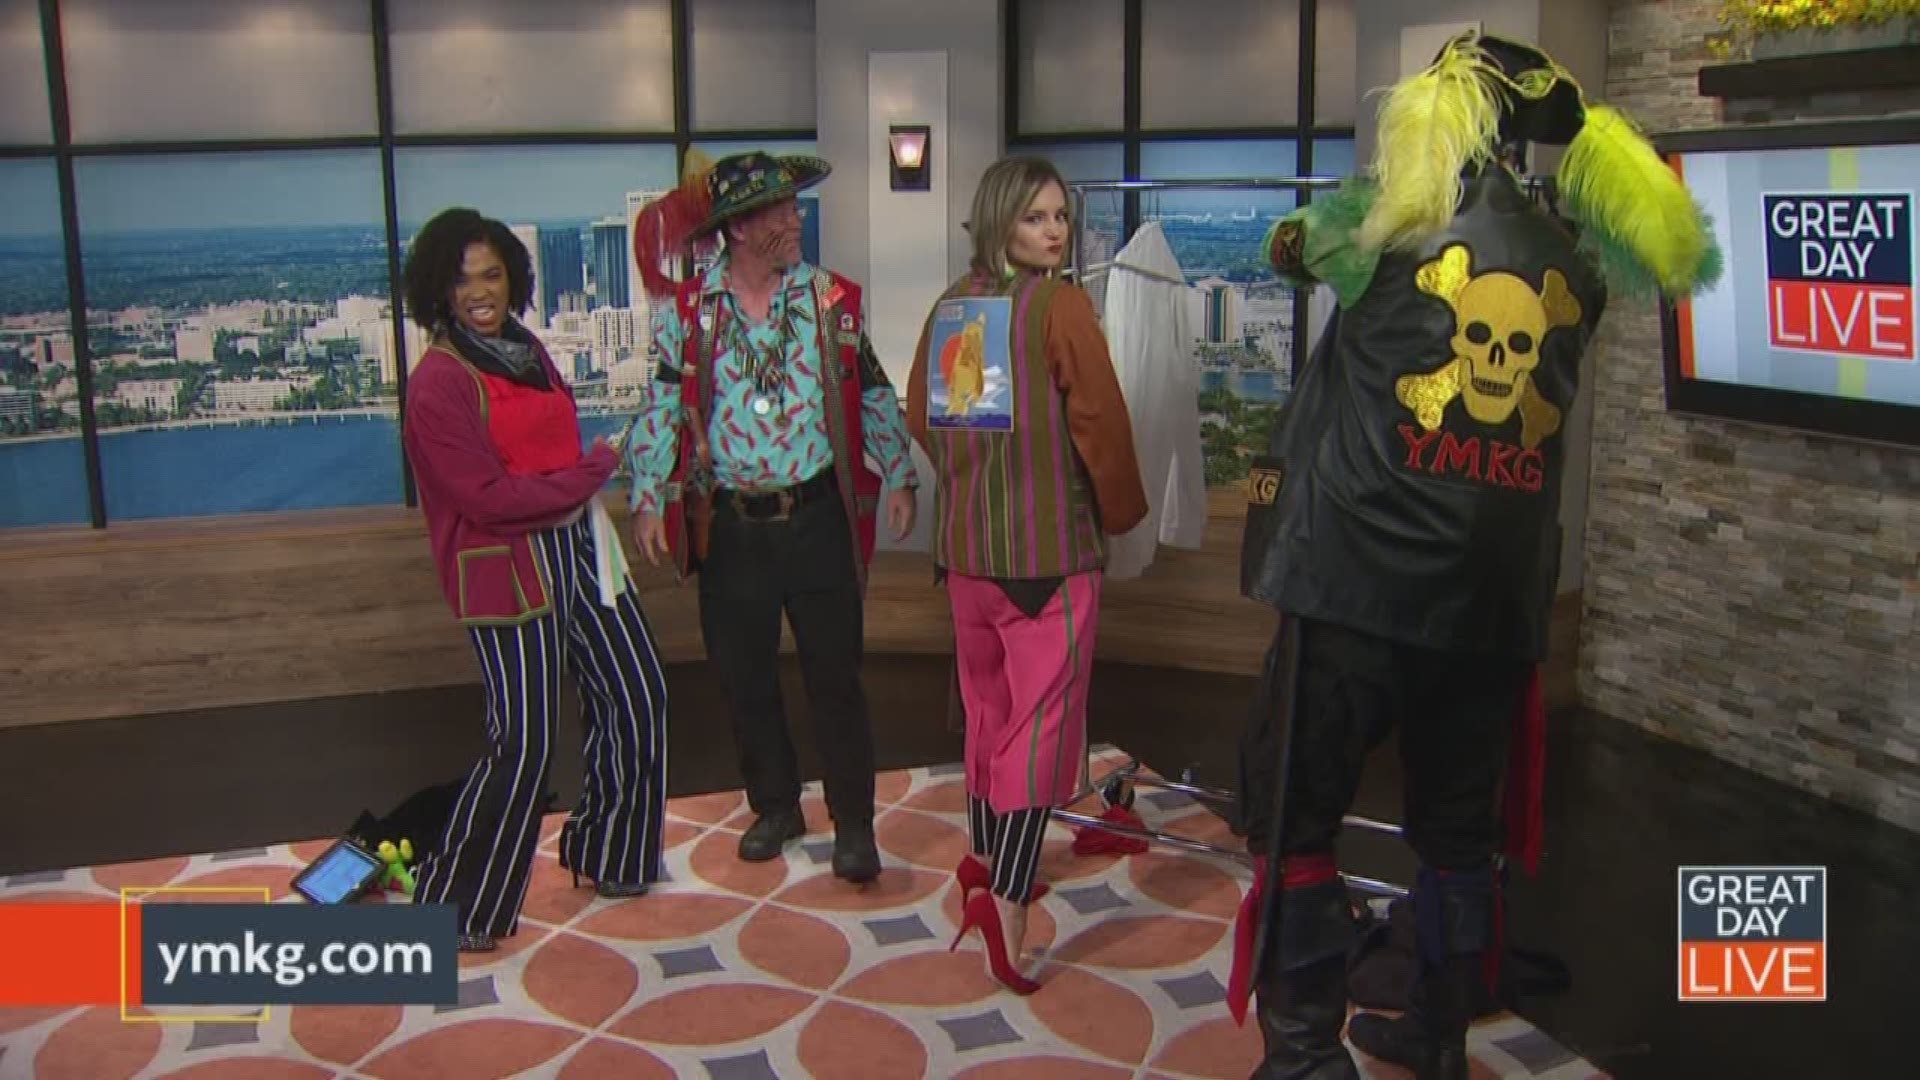 Pirates Lee Winter and Devon Carter invaded the set, beaded the hosts and showed GDL how to dress like a pirate.